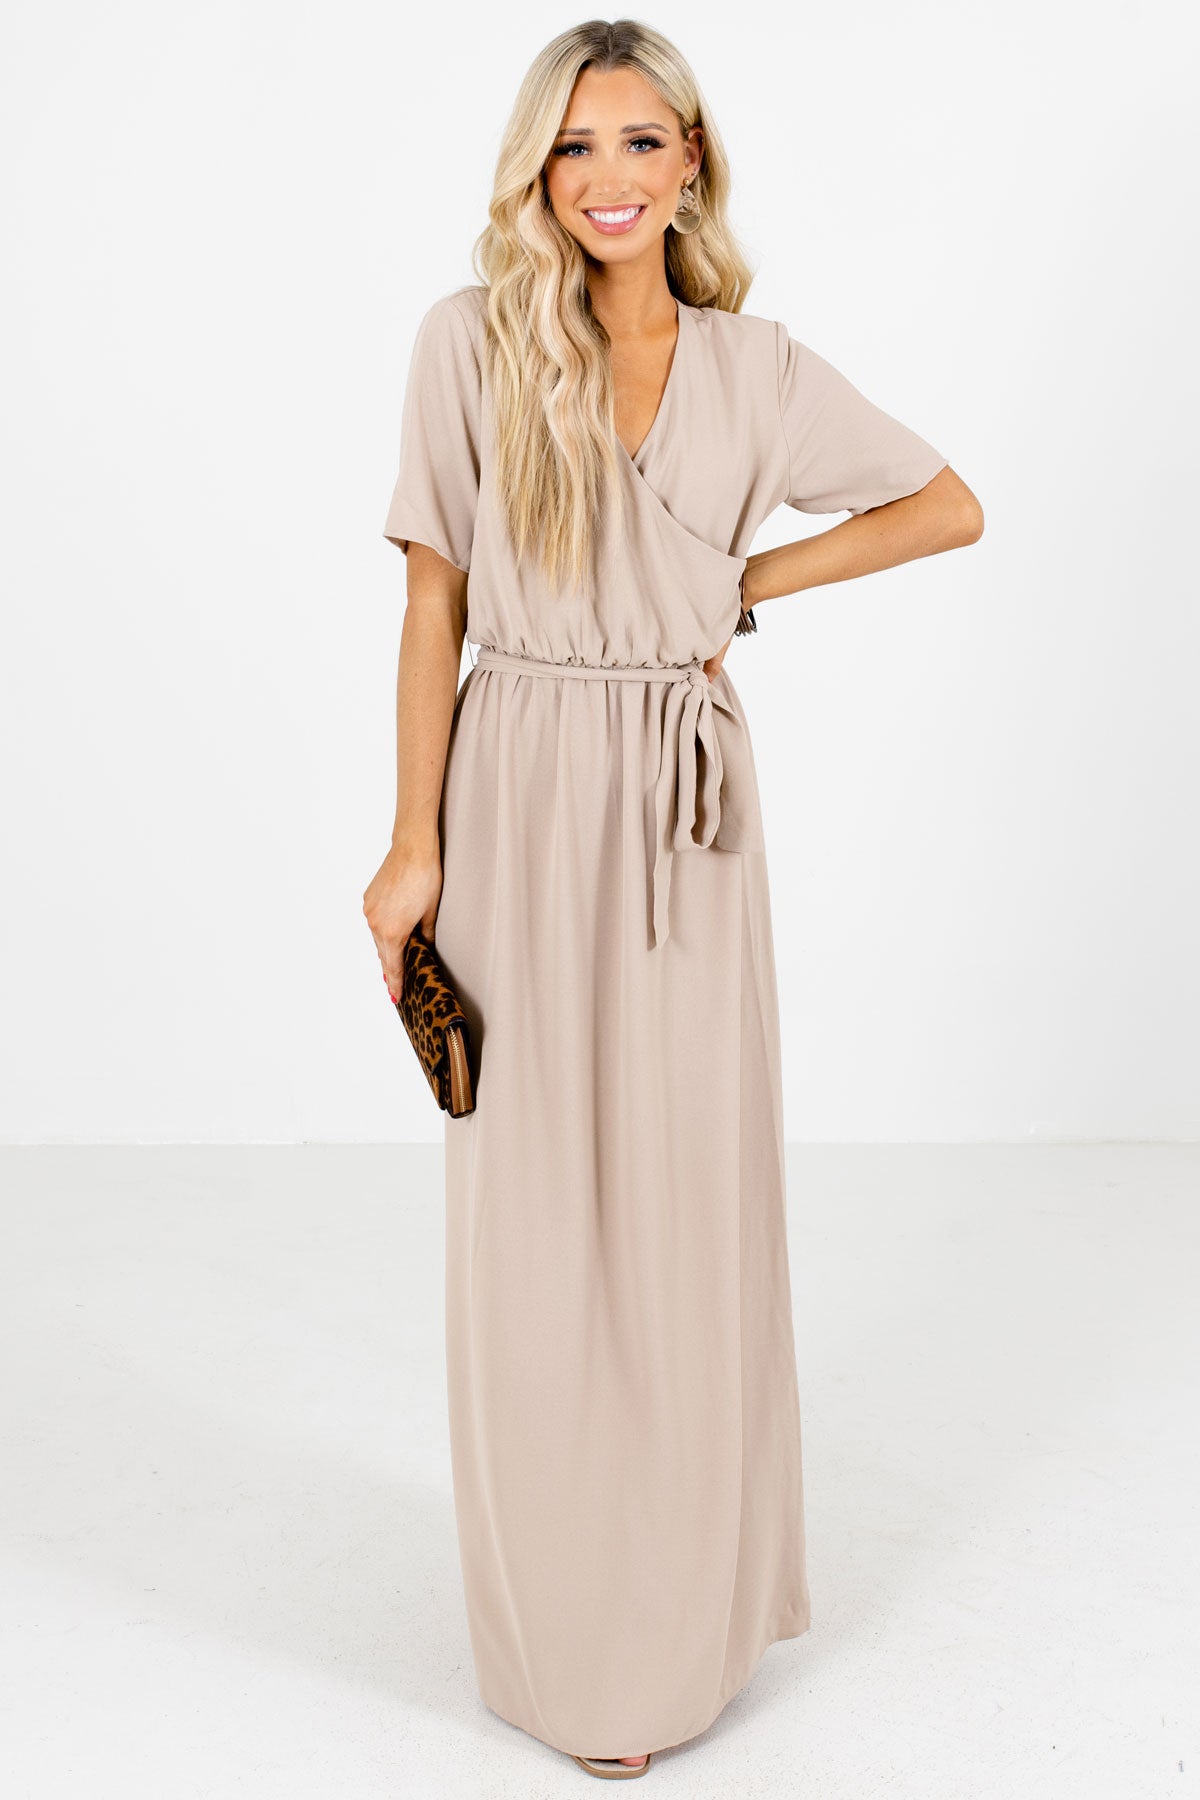 Tan Lightweight High-Quality Boutique Maxi Dresses for Women